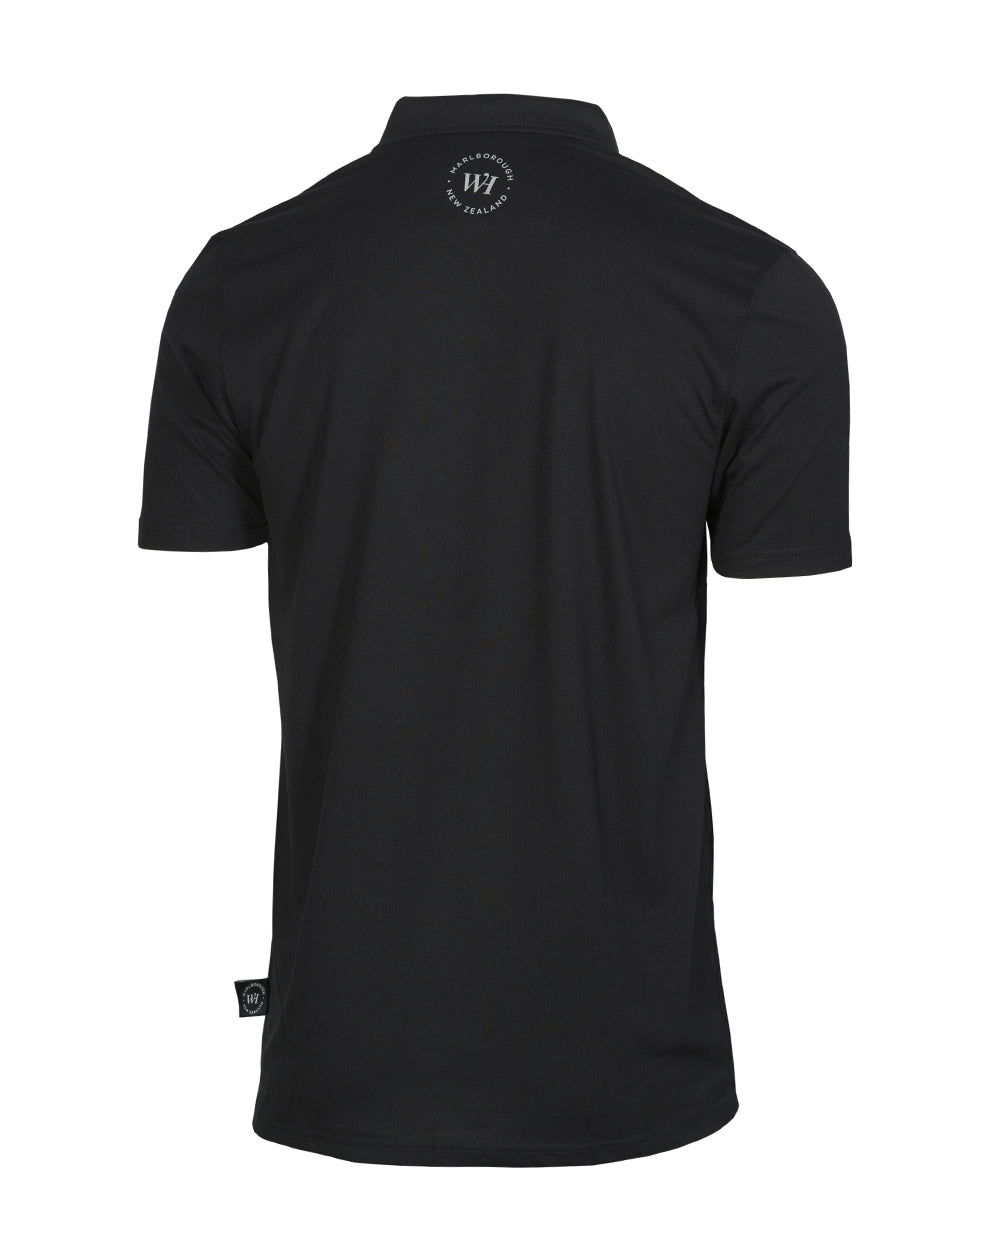 Wither Hills Polo - Men's -  Beer Gear Apparel & Merchandise - Speights - Lion Red - VB - Tokyo Dy merch